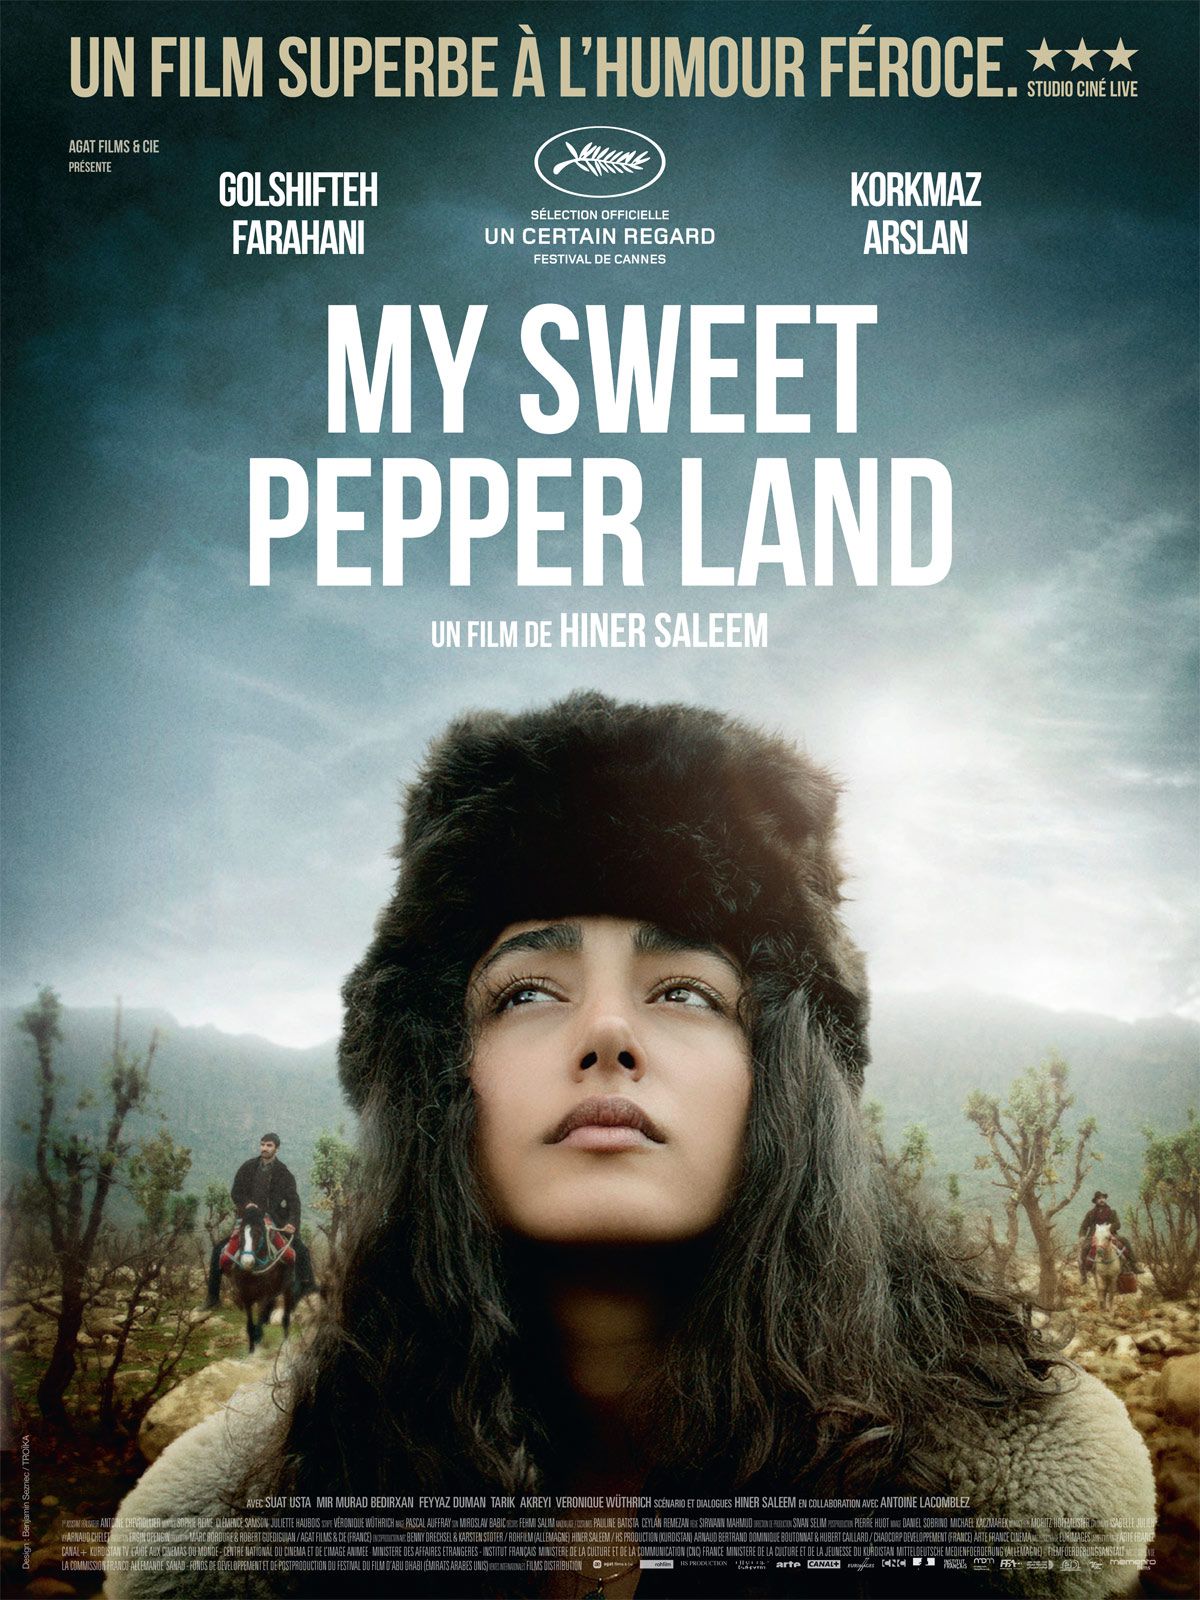 My Sweet Pepper Land - Film (2014) streaming VF gratuit complet